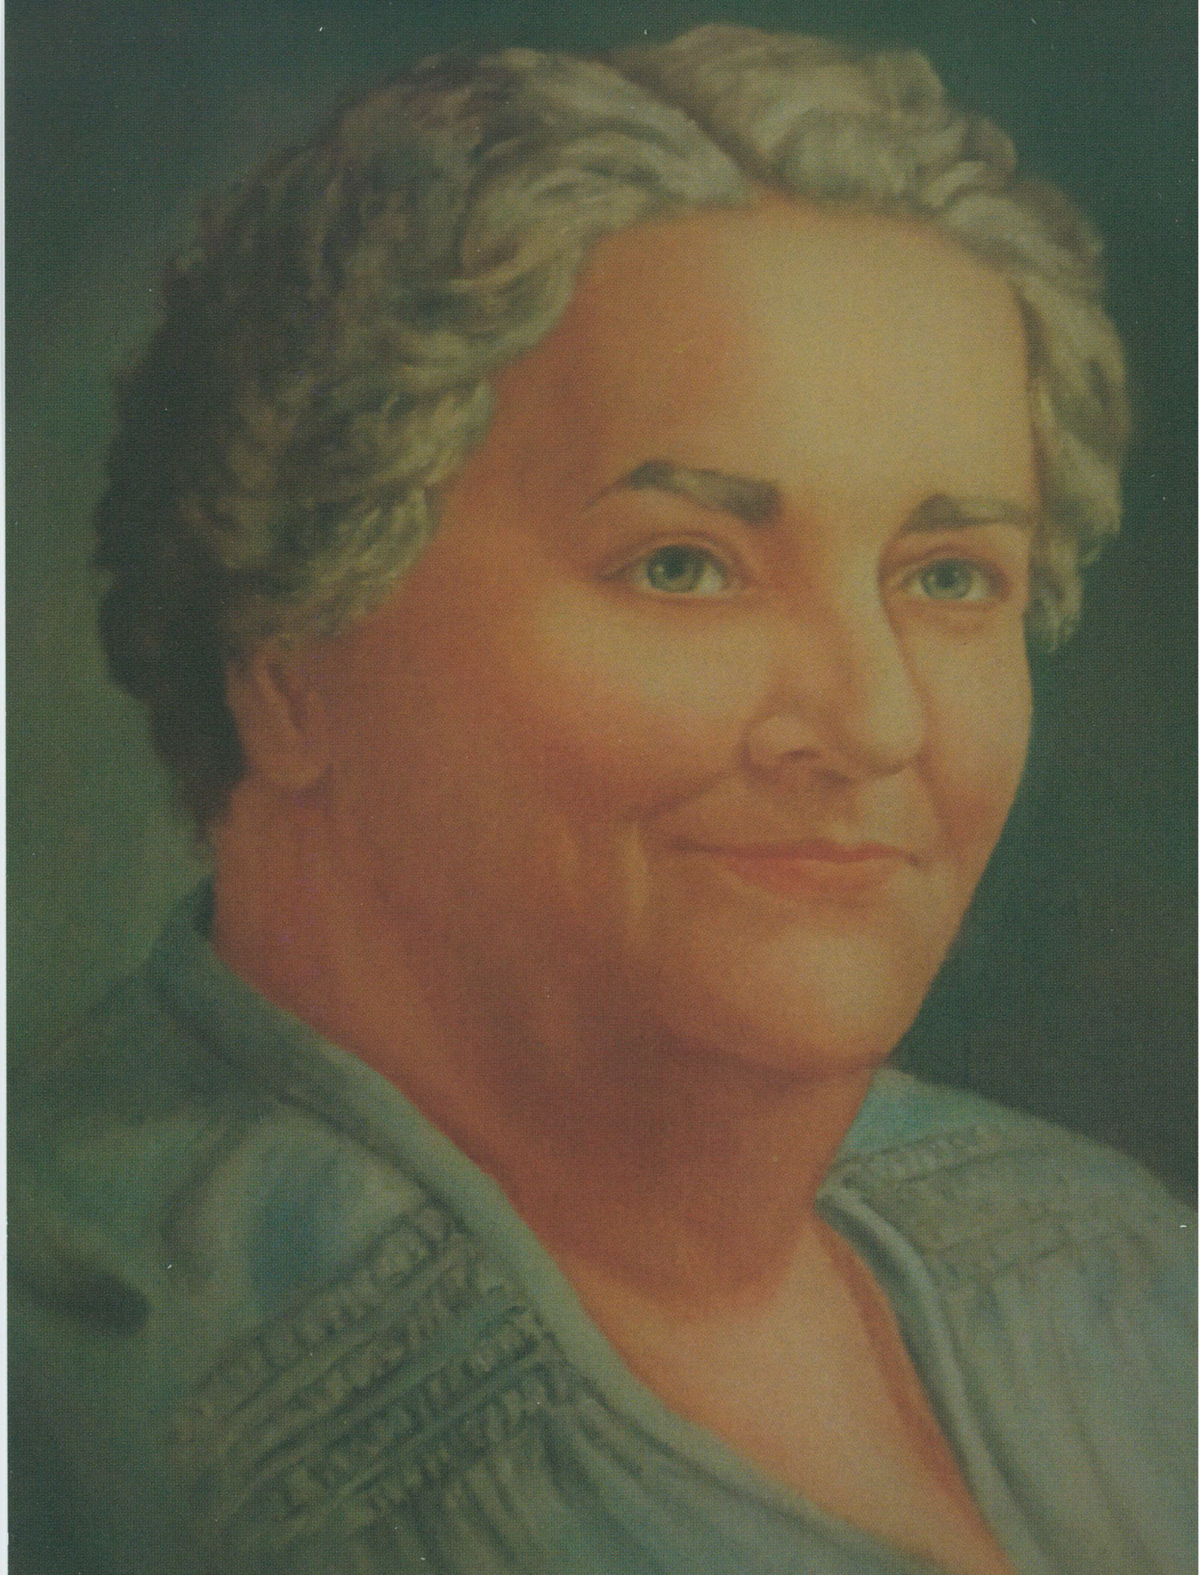 Servant of God Rhoda Wise from Canton, Ohio. Copyright 2023 Rhoda Wise House, used with permission